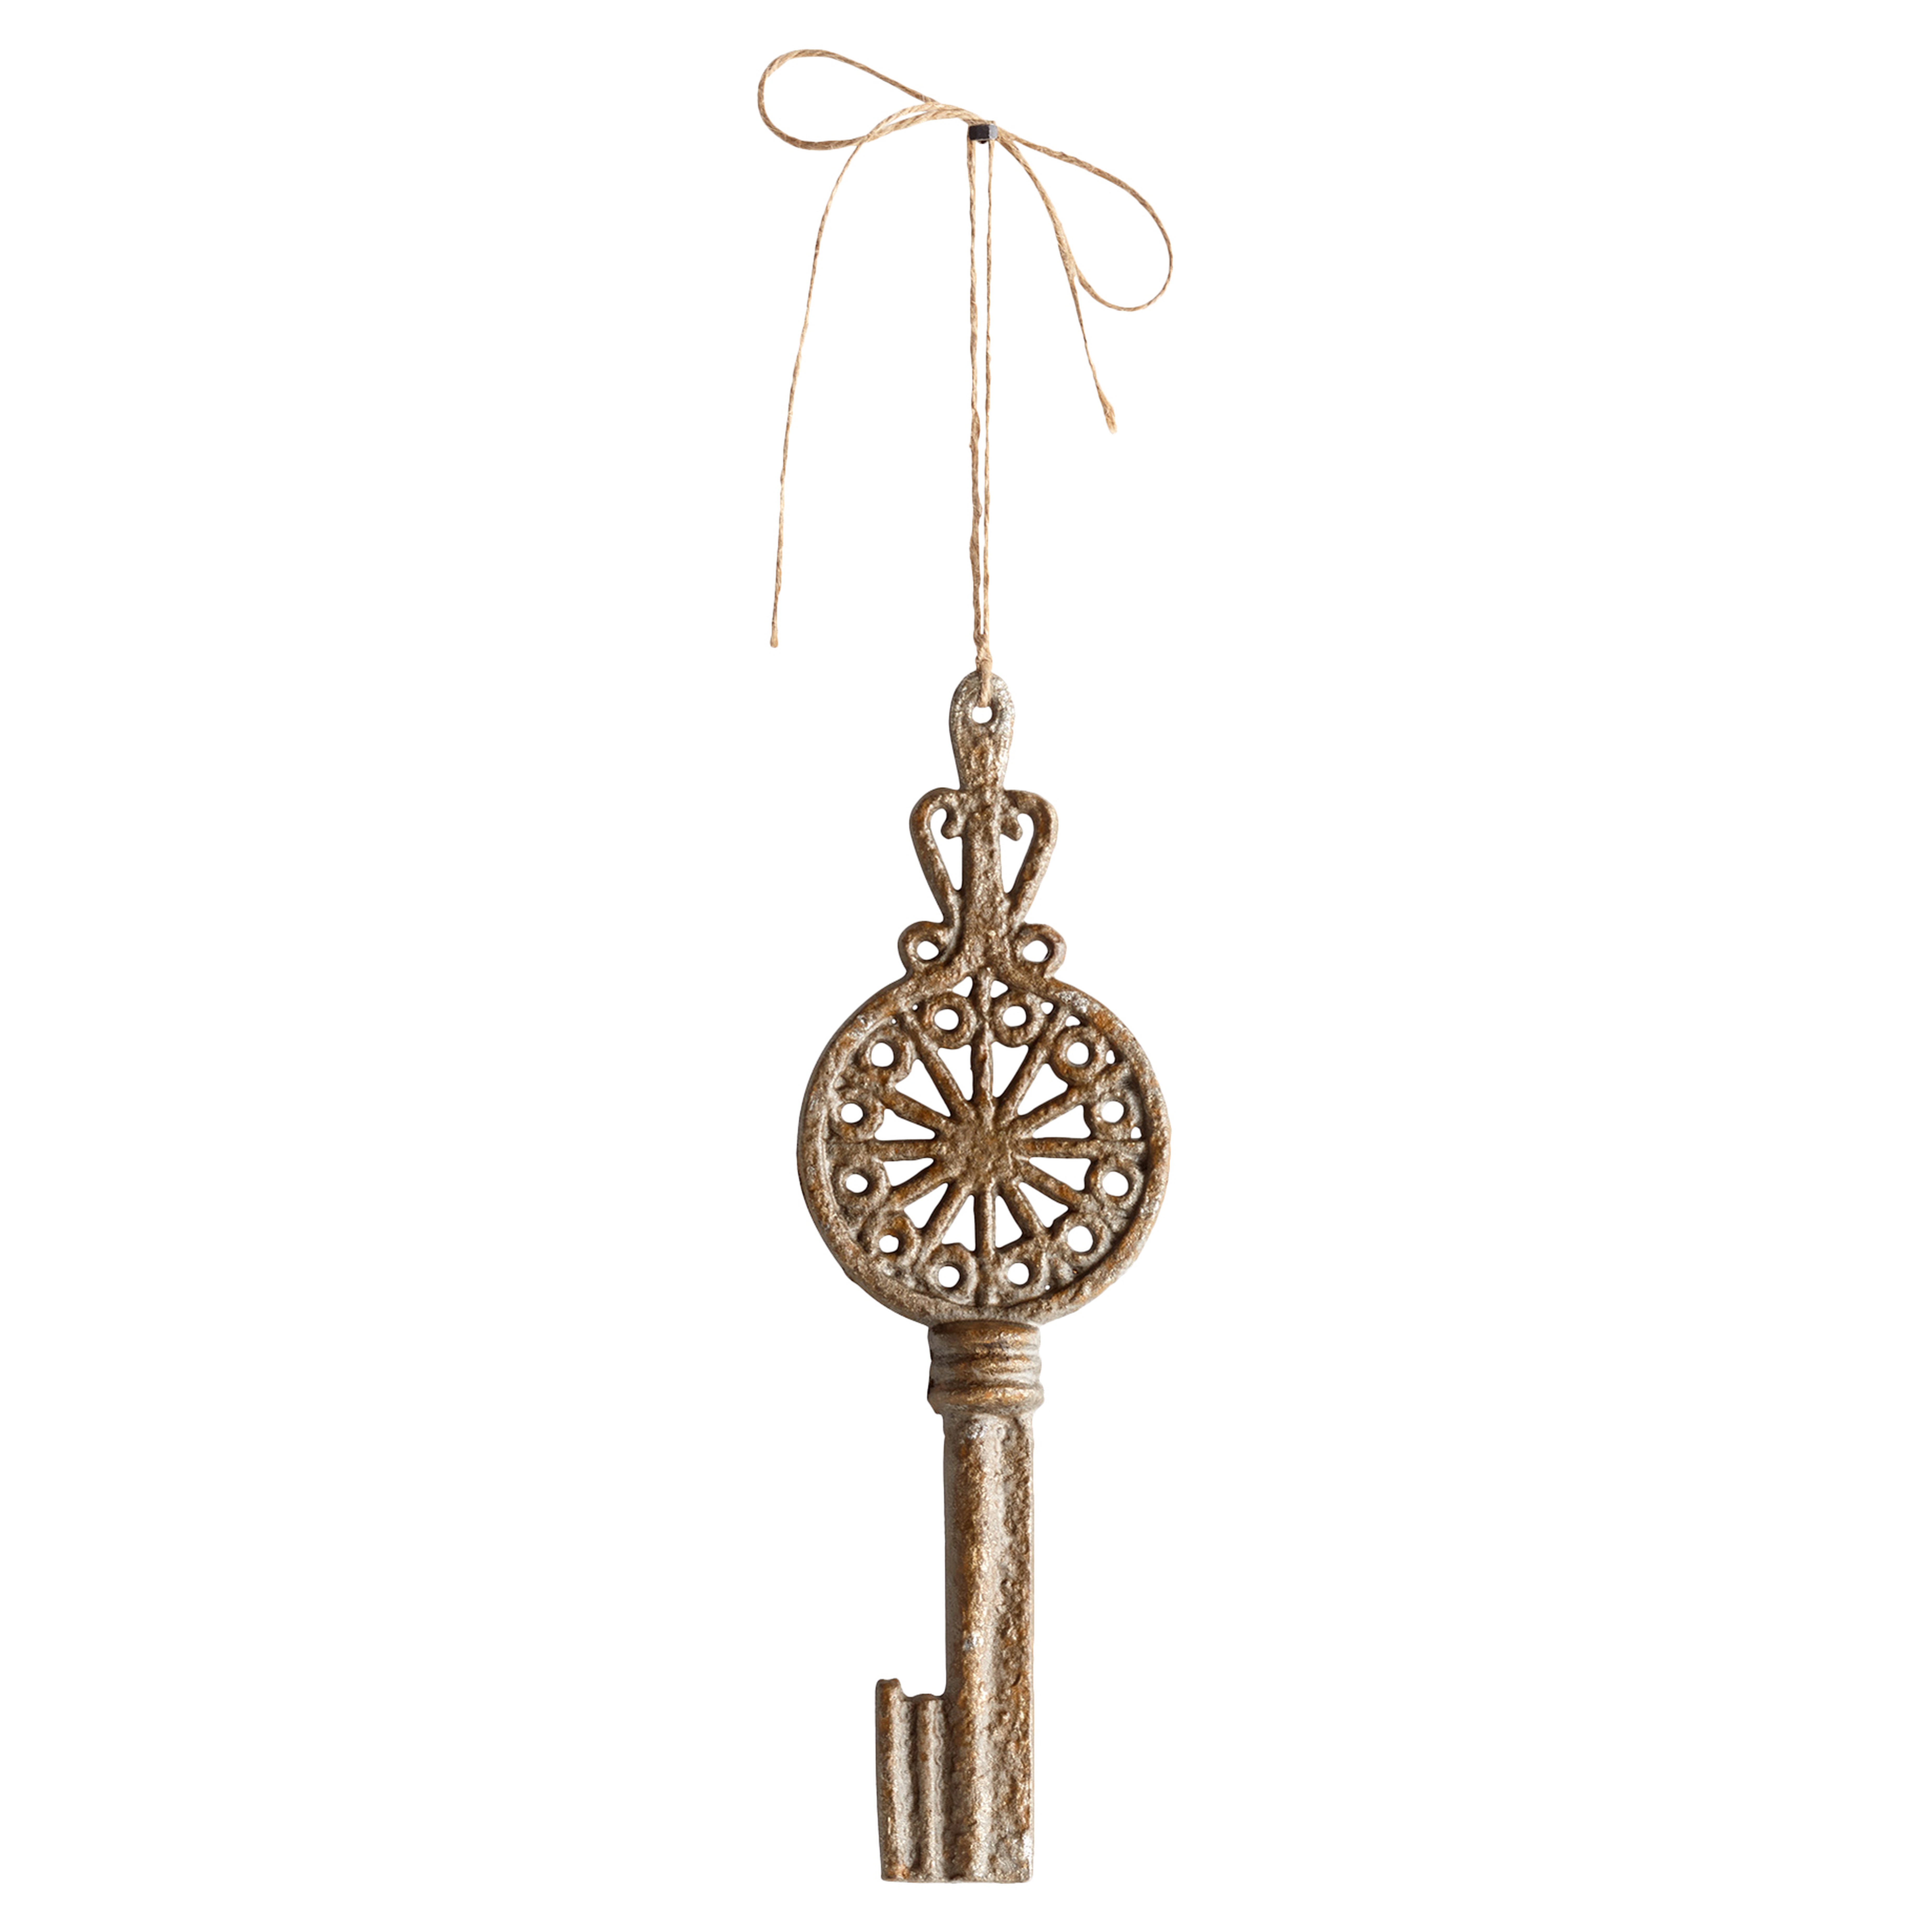 Ricard French Country Antique Metal Decorative Key Sculpture - Kathy Kuo Home